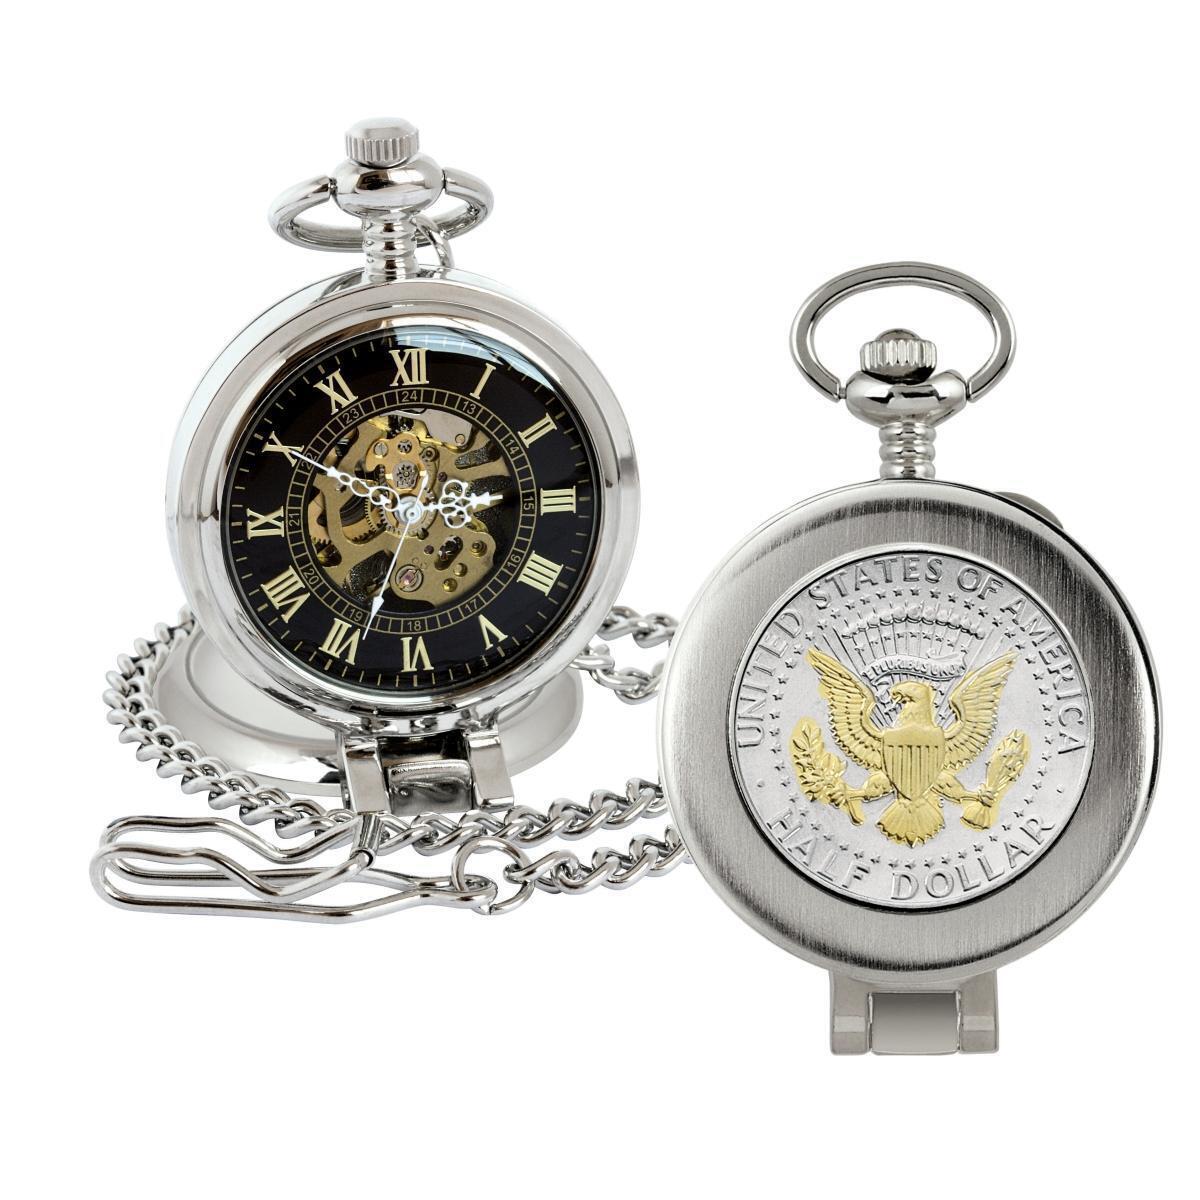 American Coin Treasures 16269 Selectively Gold-Layered Presidential Seal JFK Half Dollar Coin Pocket Watch with Skeleton Movement, Black Dial with Gold Roman Numerals - Magnifying Glass